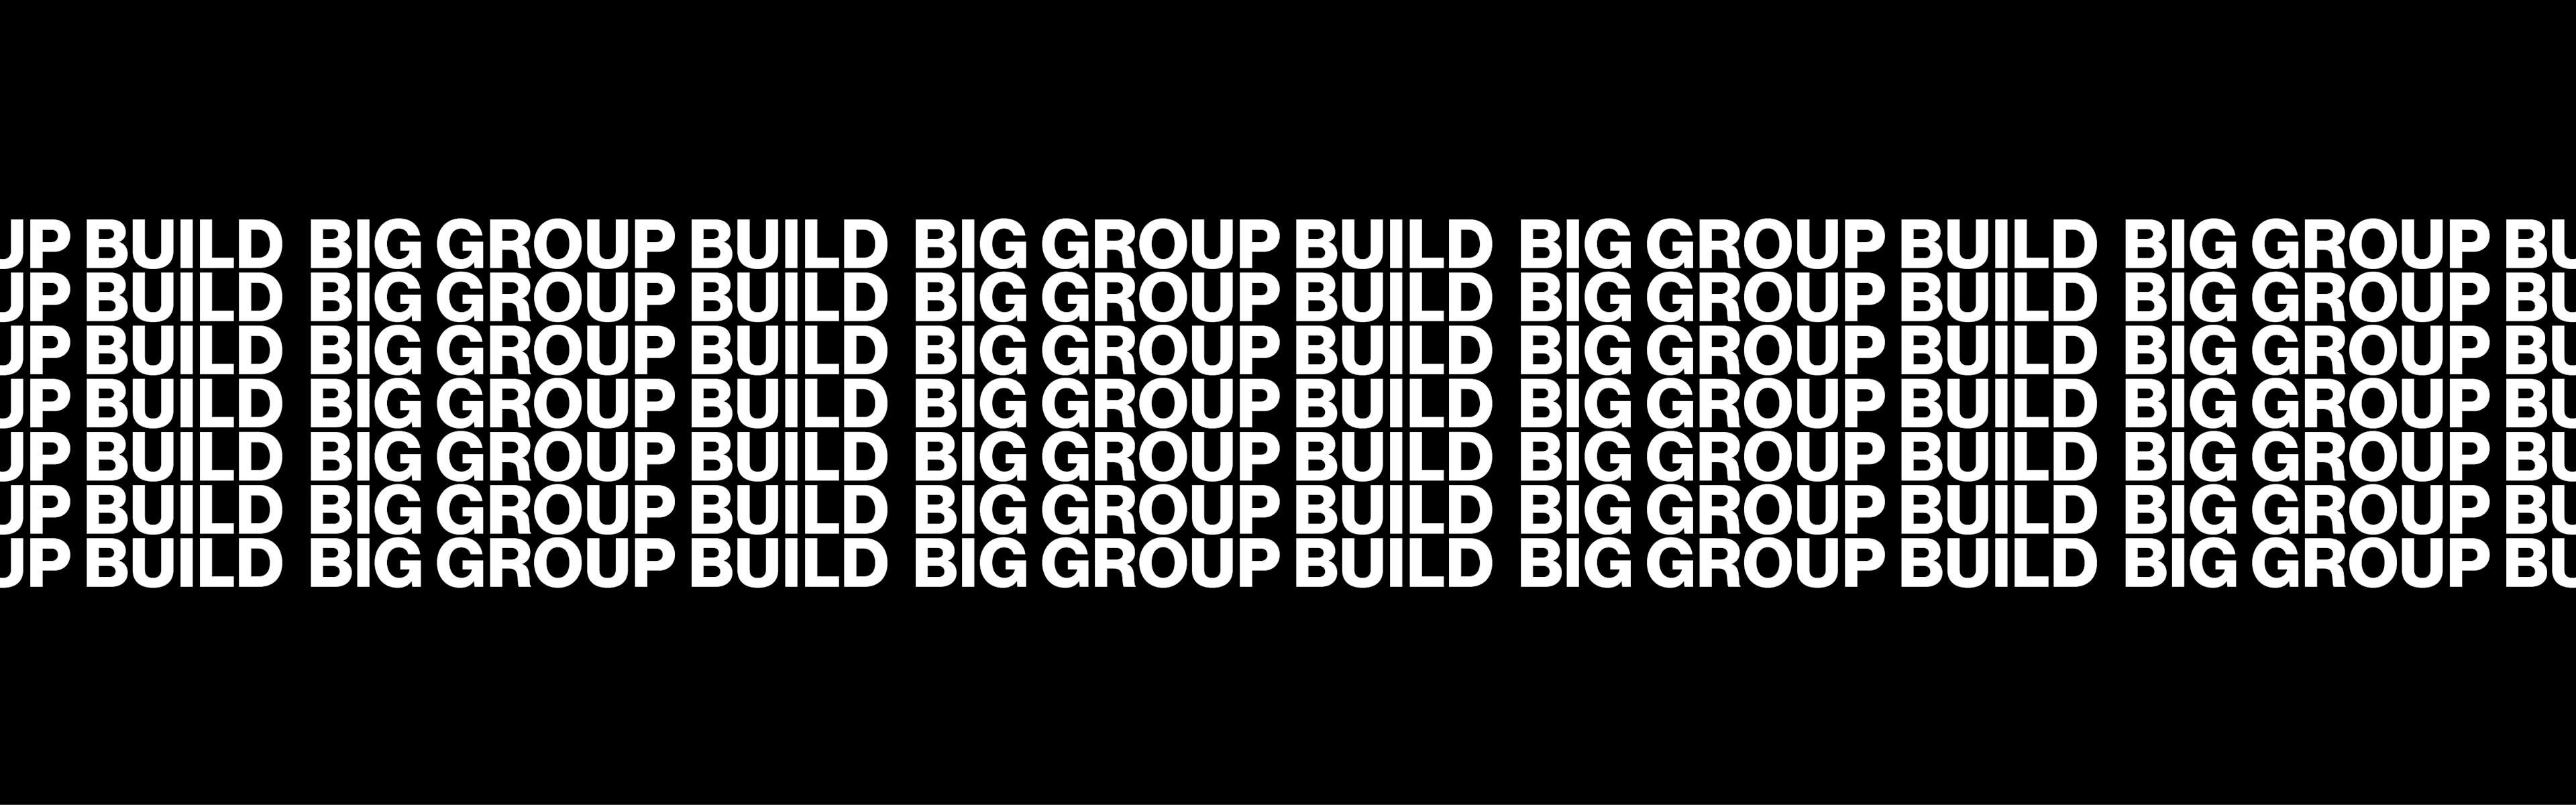 "Big Group Build" in graphic text art.